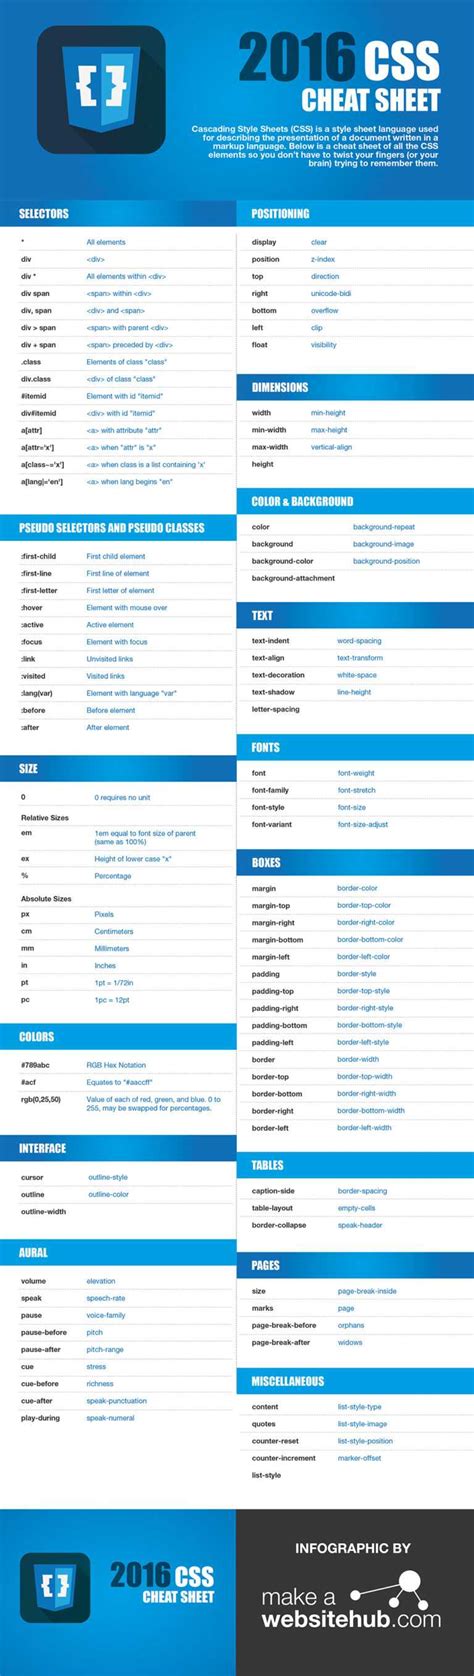 120 Great Cheat Sheets For Wordpress Web Developers And In Cheat